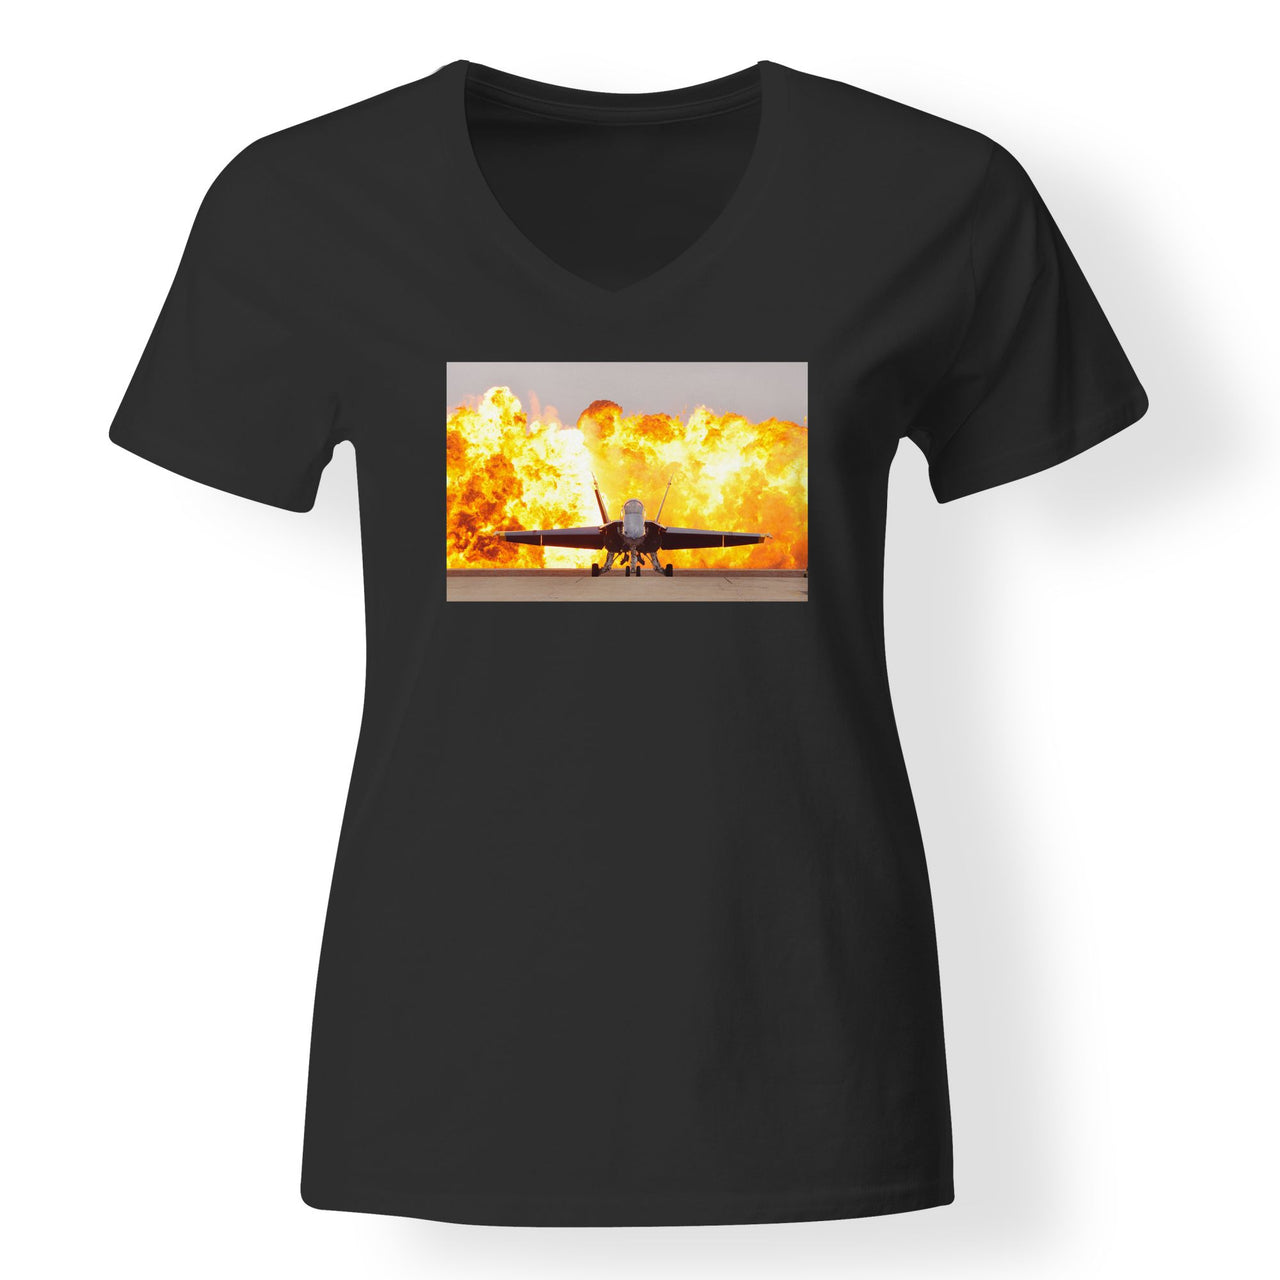 Face to Face with Air Force Jet & Flames Designed V-Neck T-Shirts